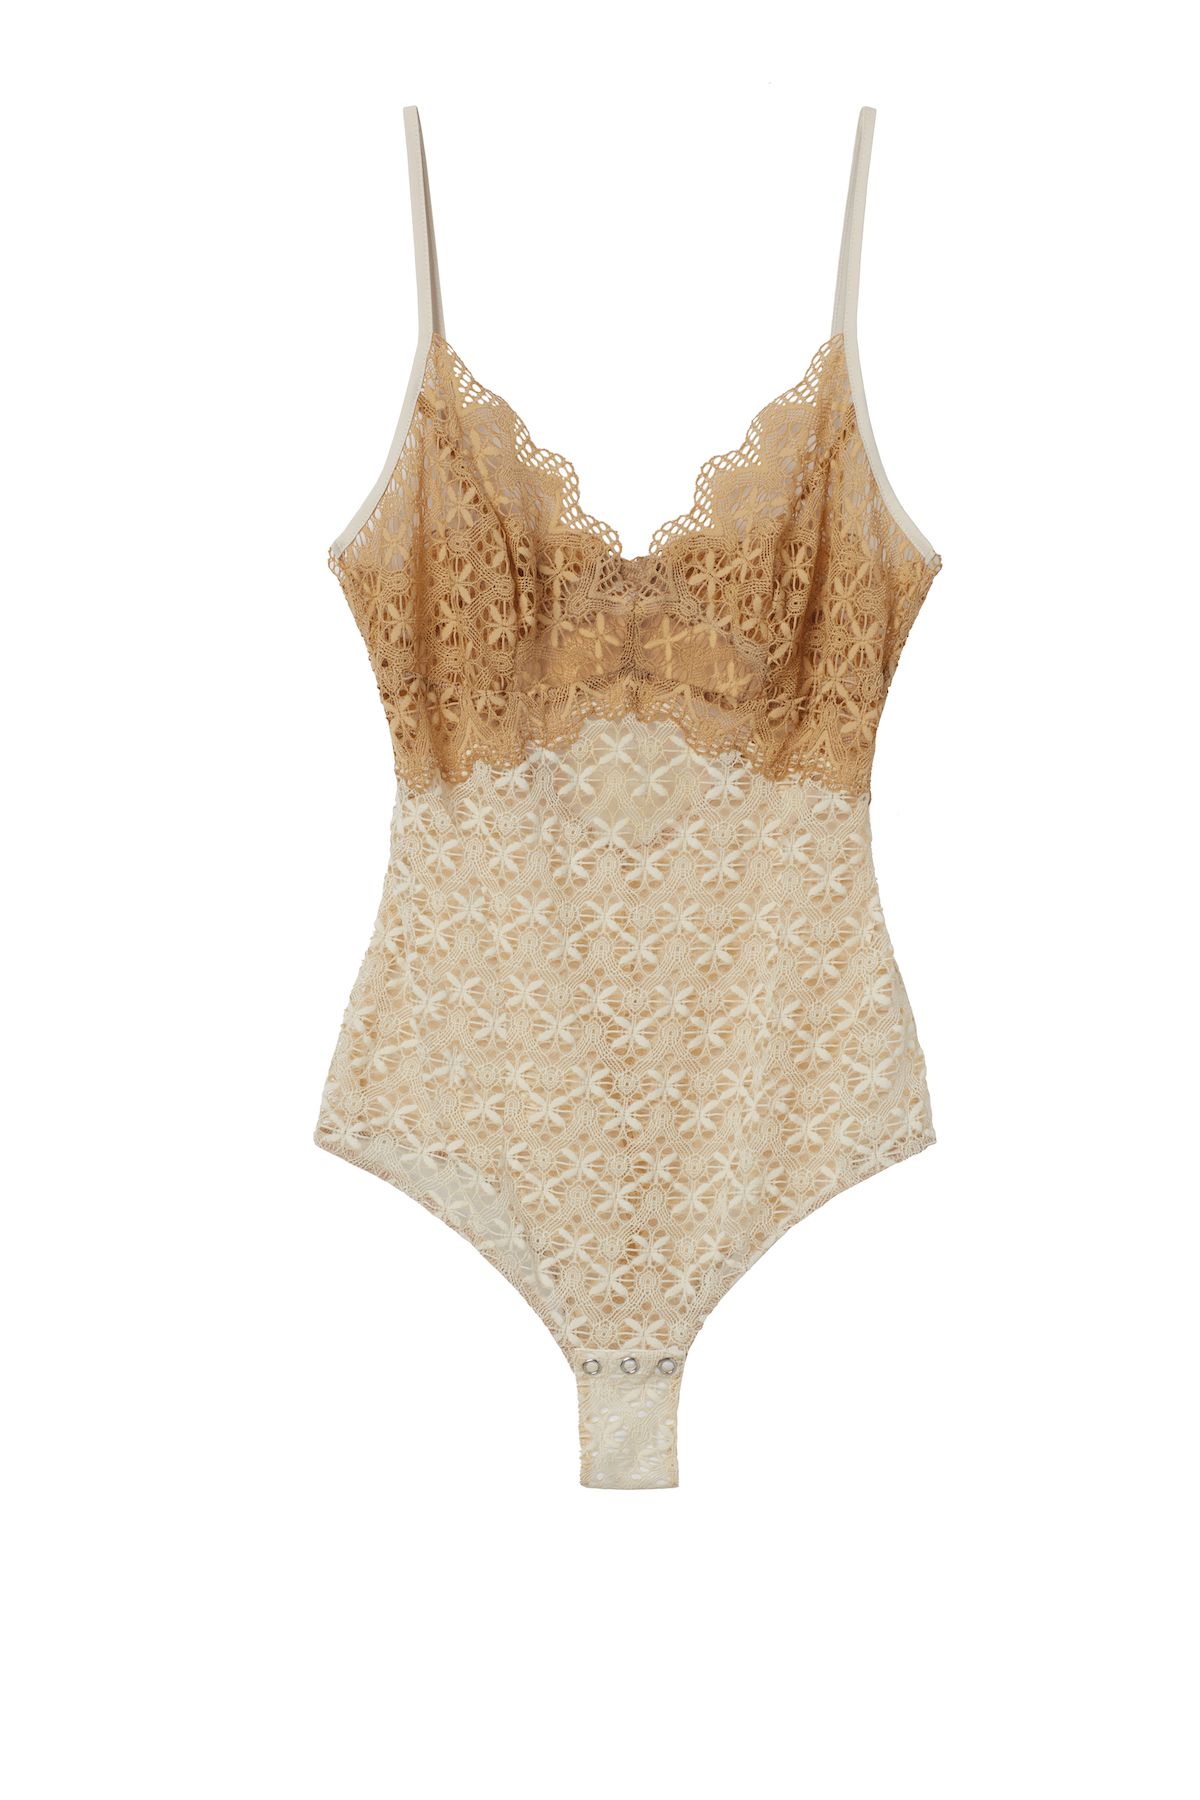 Intimissimi launches Nature’s Dream sustainable lingerie collection